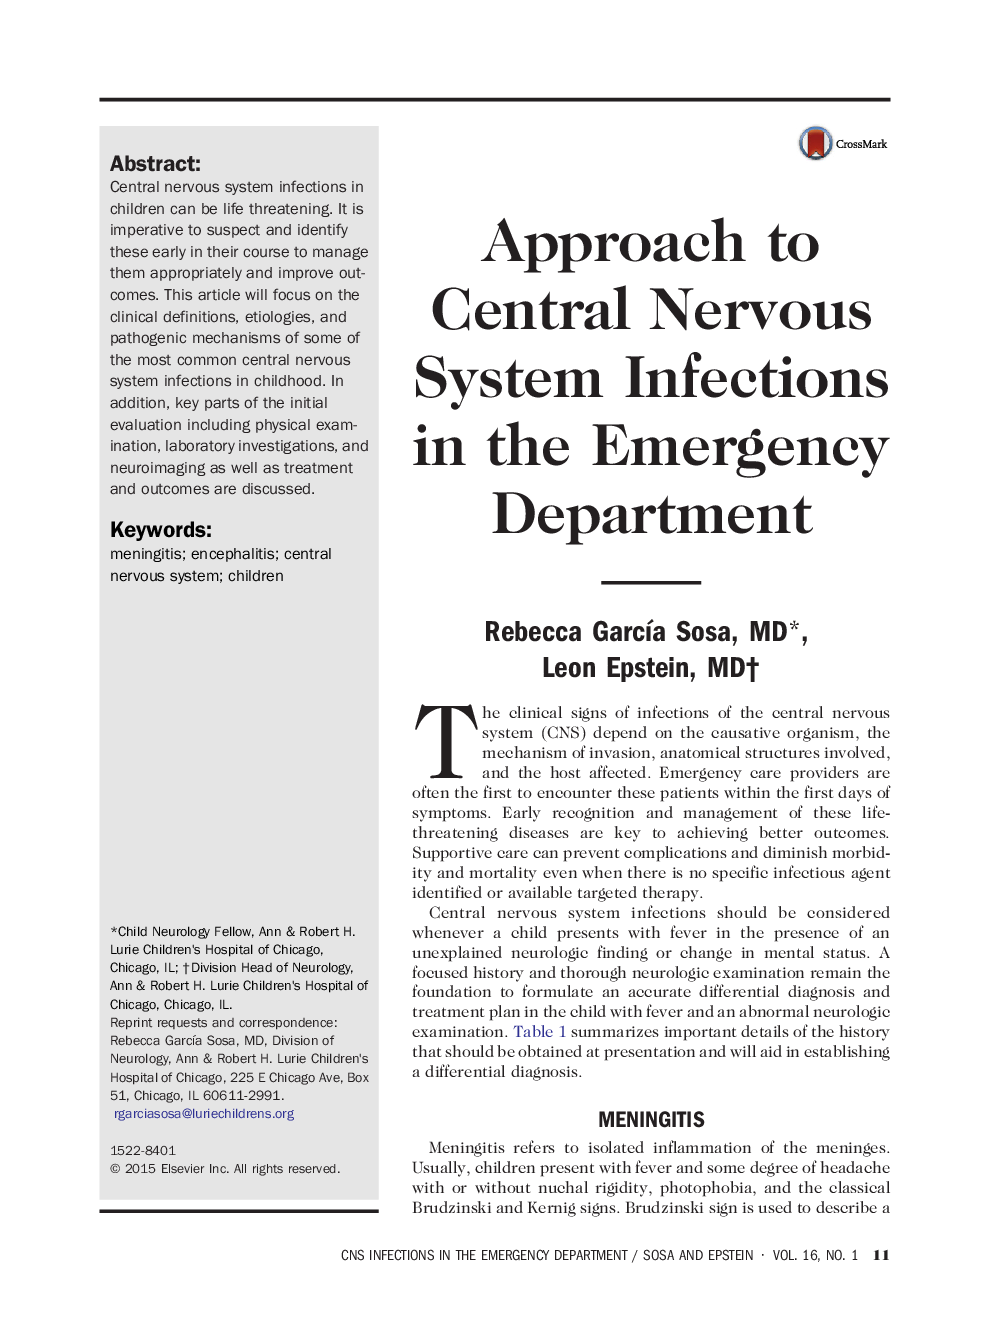 Approach to Central Nervous System Infections in the Emergency Department